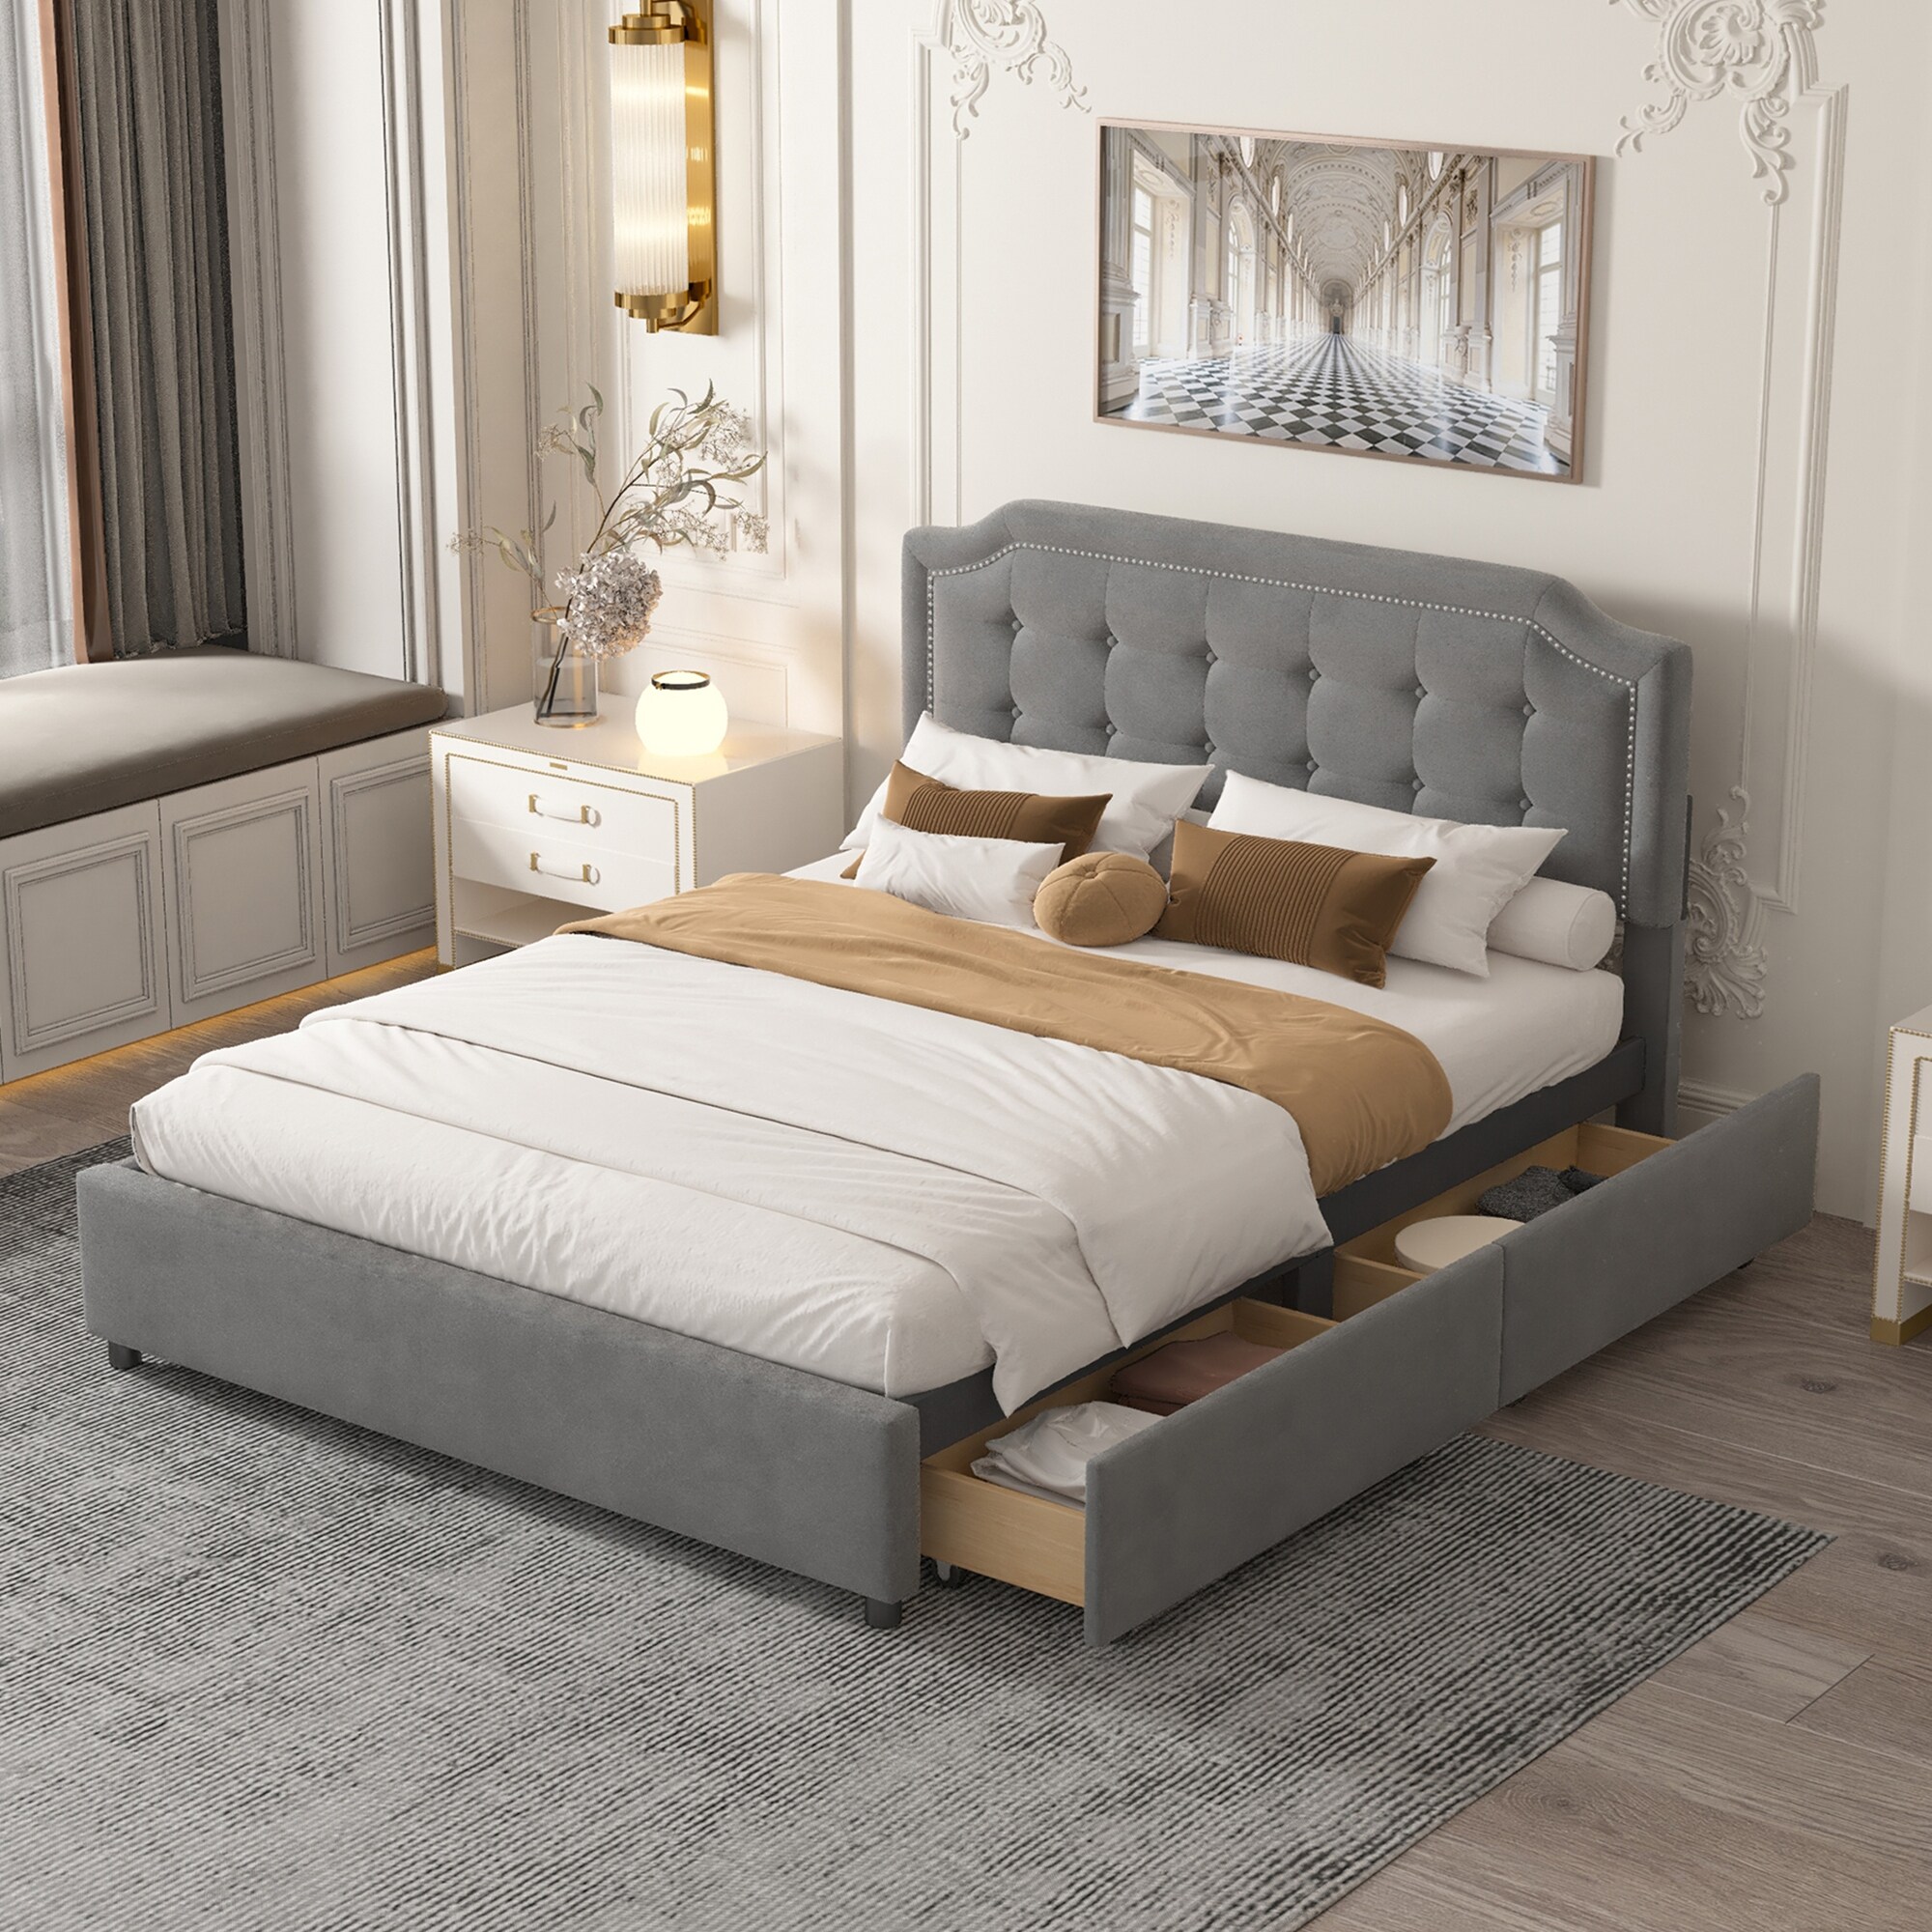 https://ak1.ostkcdn.com/images/products/is/images/direct/0696204b96b78aa756b972e81ed9672bf7cbdc05/Queen-Size-Upholstered-Platform-Bed-with-Velvet-Fabric-Classic-Headboard-and-4-Drawers.jpg